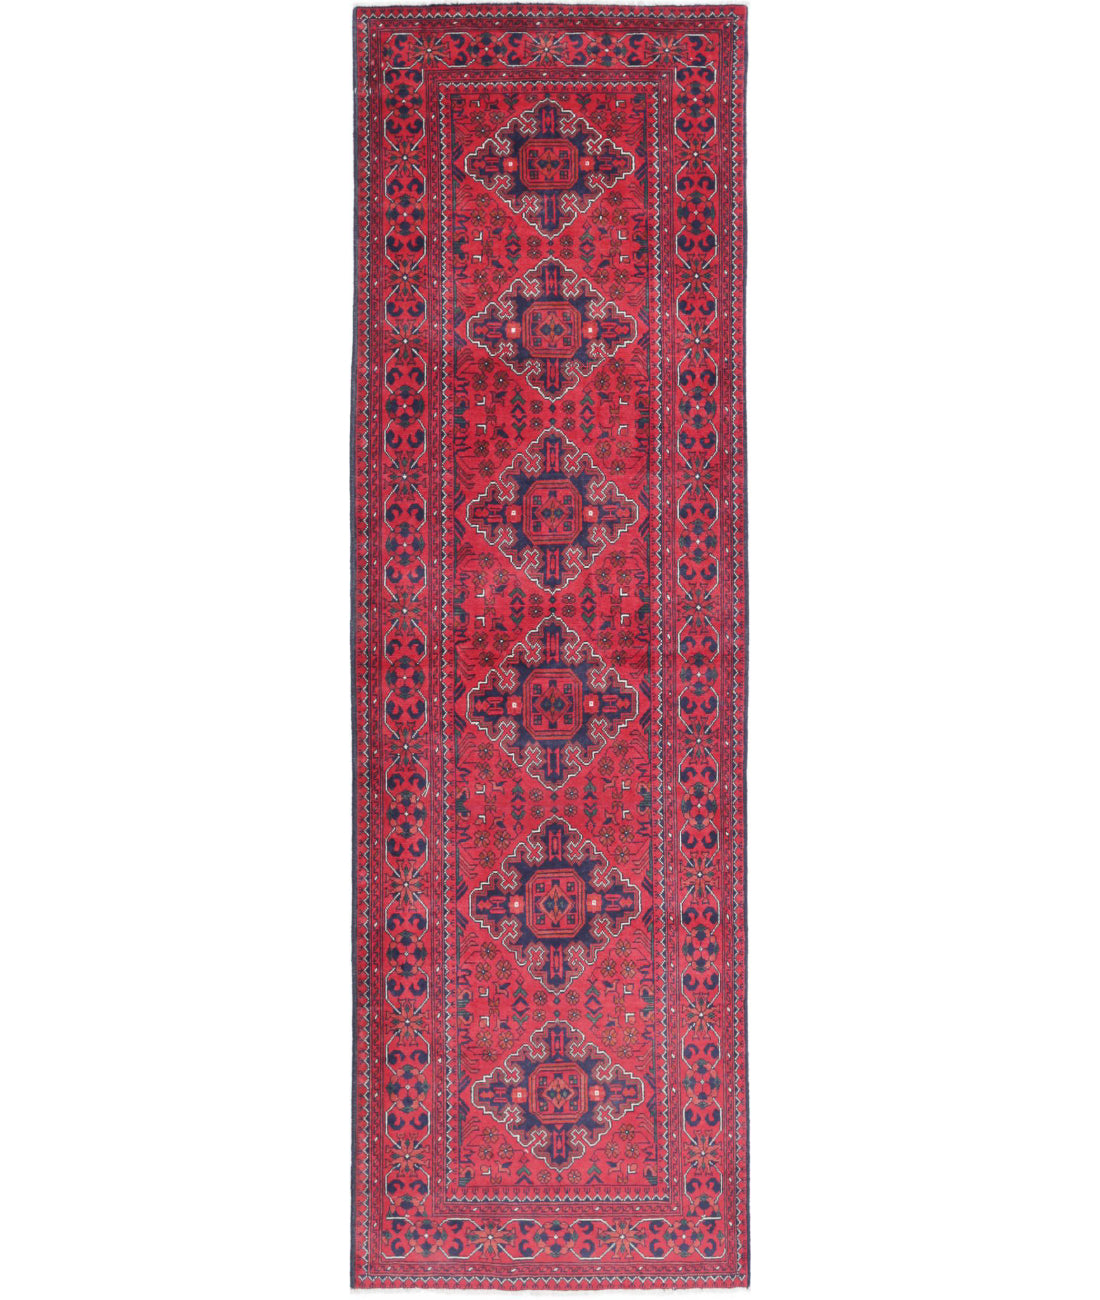 Afghan 2'8'' X 9'7'' Hand-Knotted Wool Rug 2'8'' x 9'7'' (80 X 288) / Red / Black